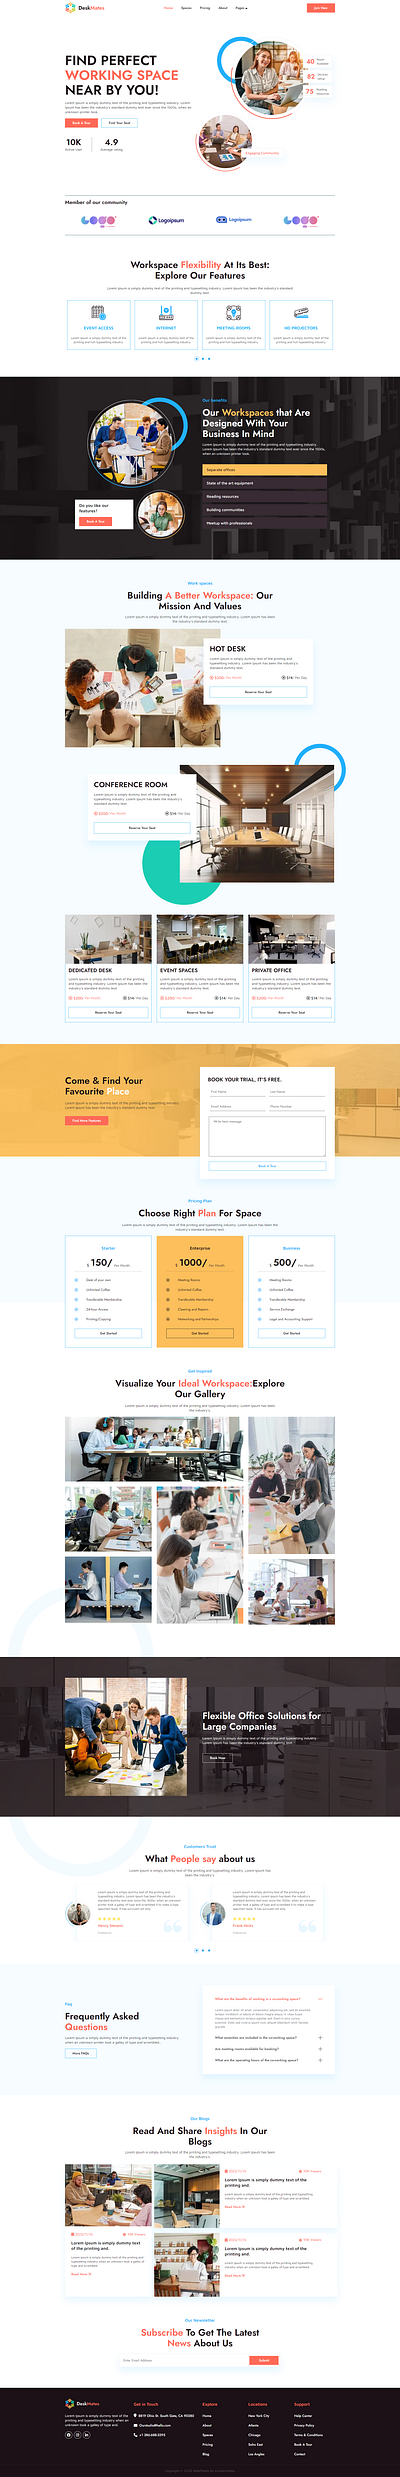 Deskmates - Office Rental And Coworking Space HTML5 Template workplace